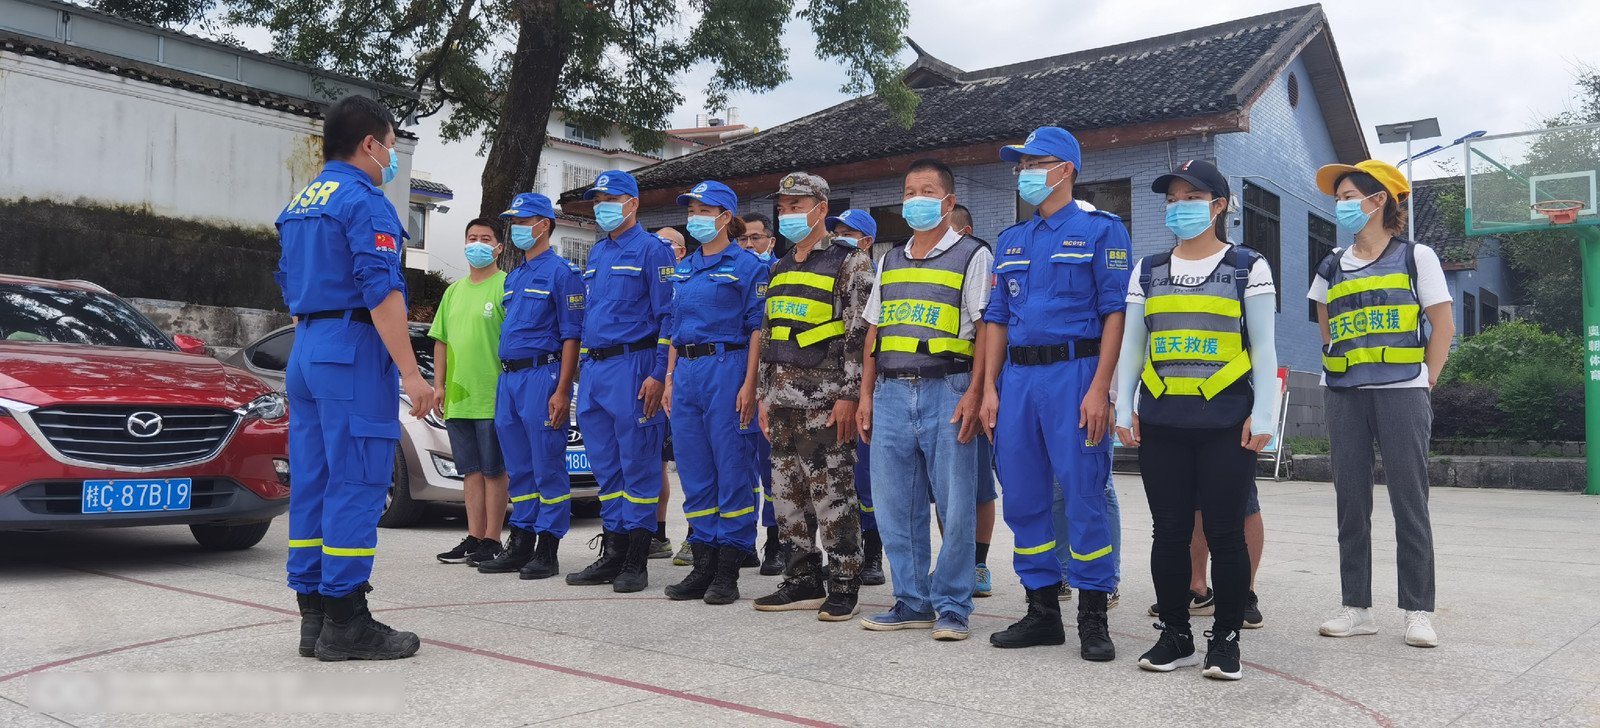 Blue Sky Rescue, Oxfam's local partner organisation in Guilin